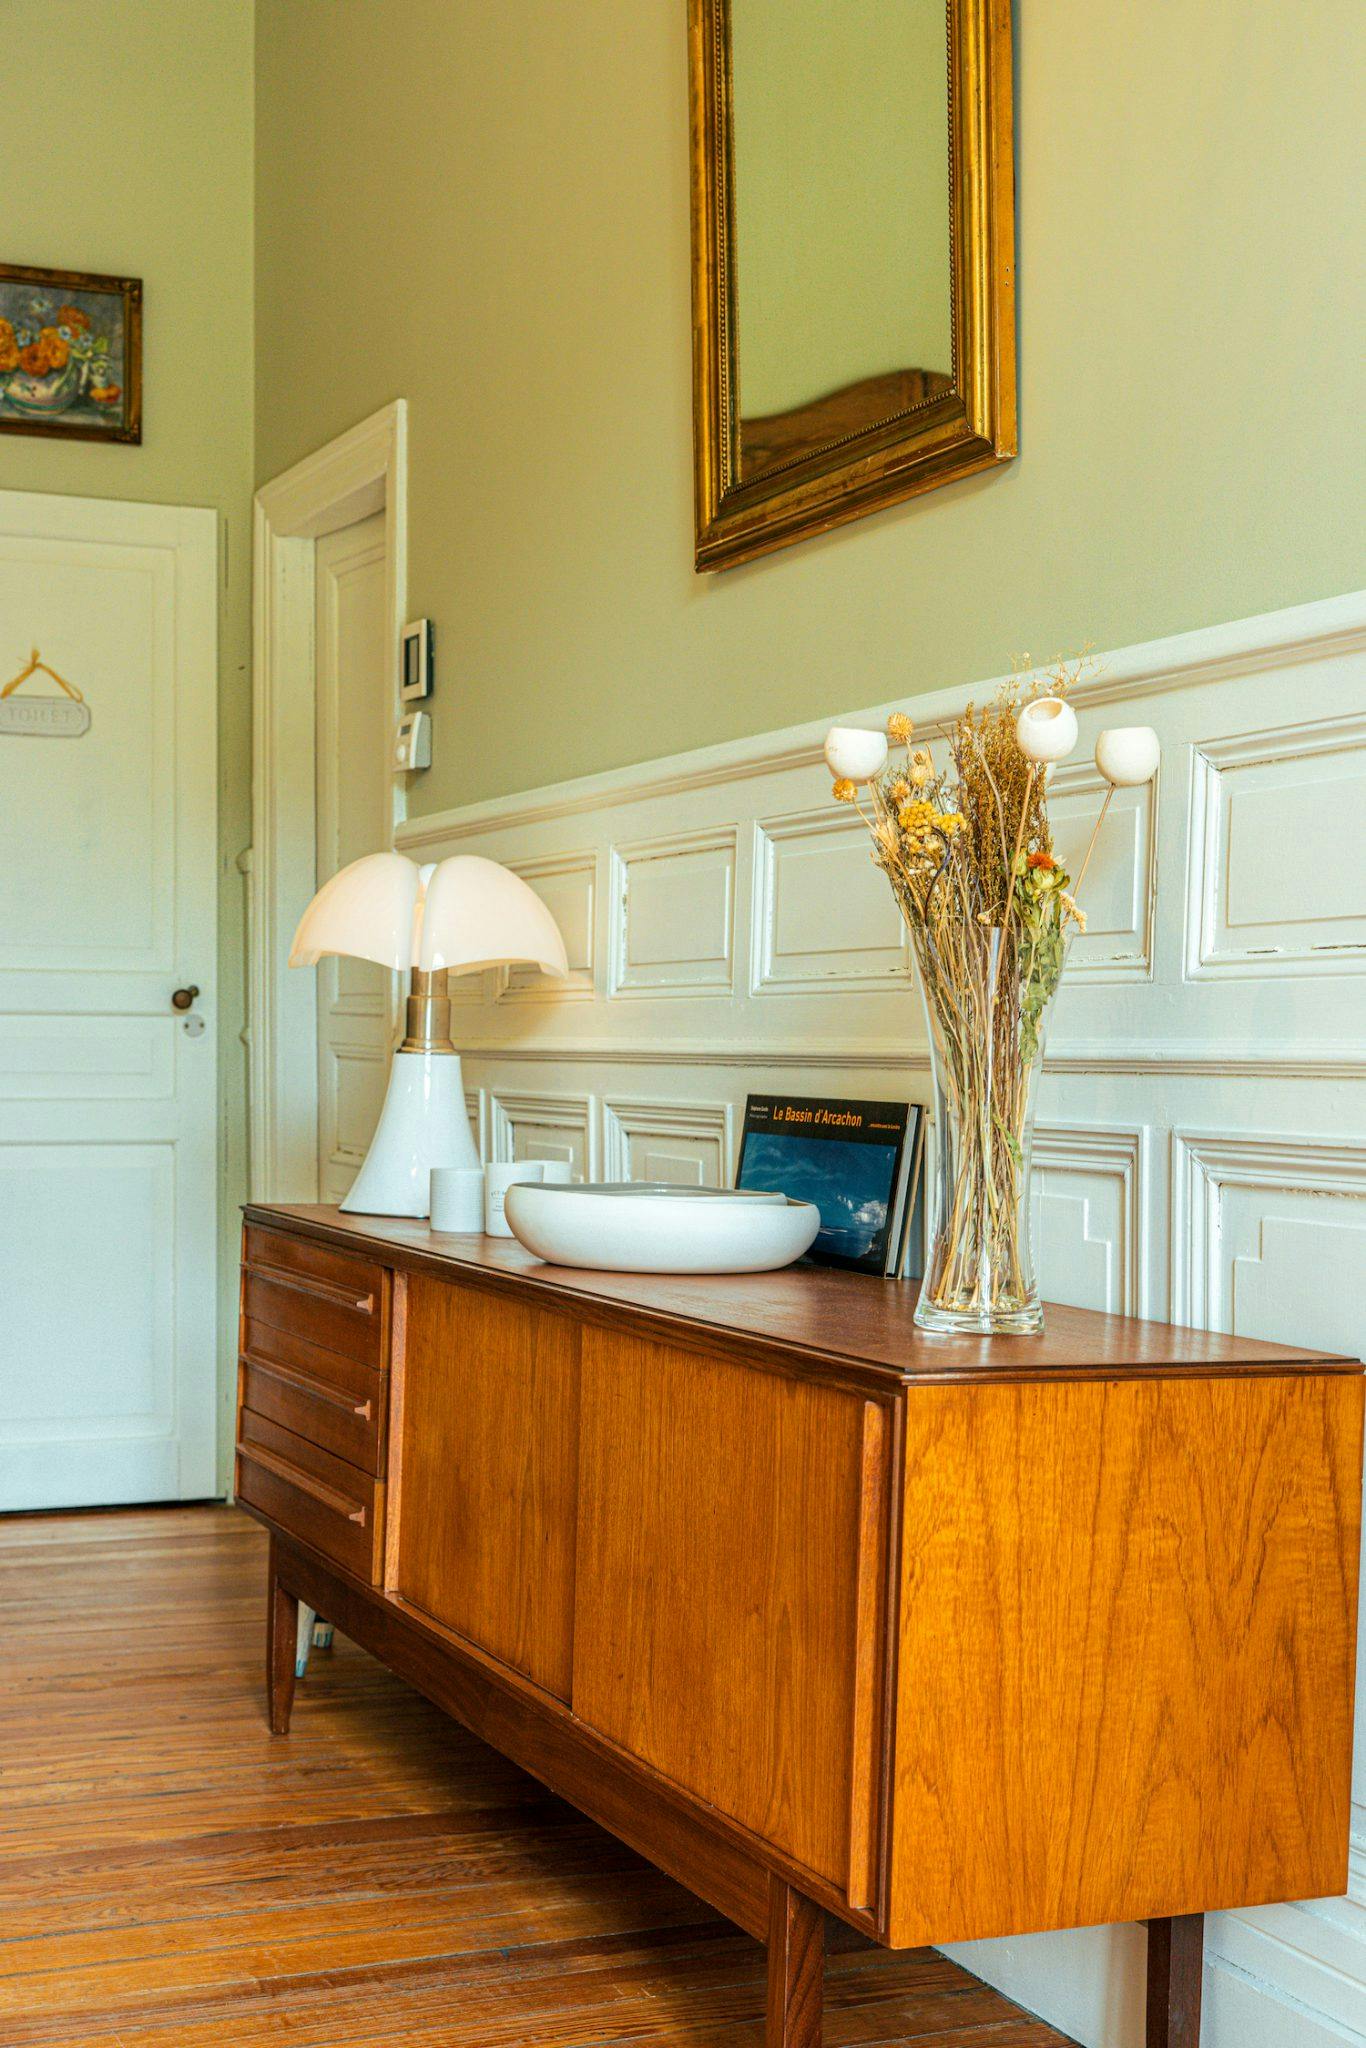 Vintage enfilade cabinet in the entrance hall with antique mouldings and frames, in a modern spirit